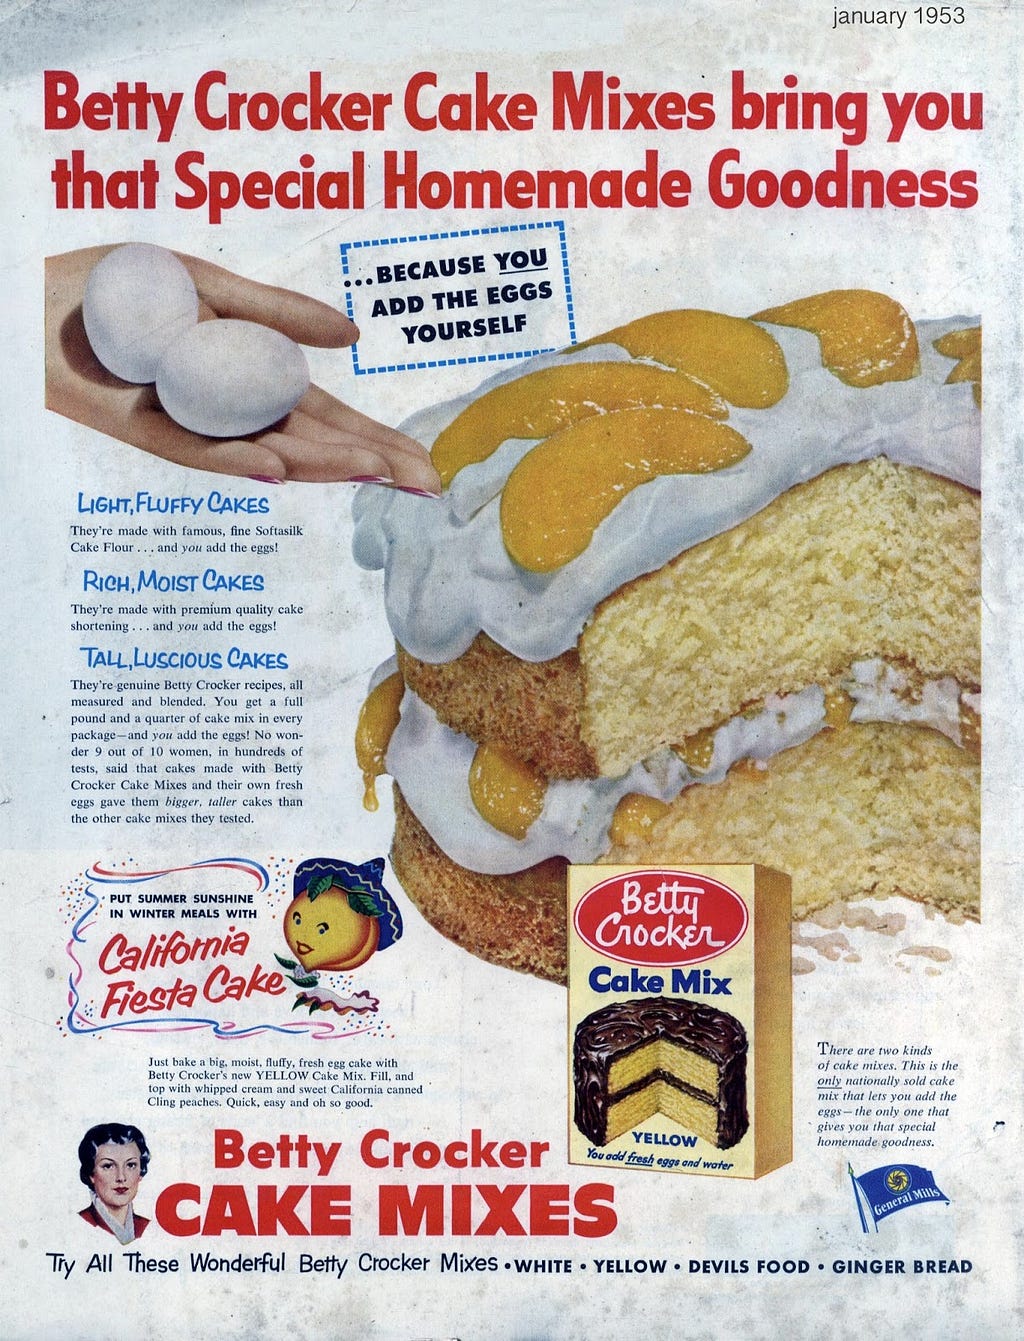 Vintage advertisement from betty crocker cake mix showing layer cake with icing and fruit on white background. Text says: “Betty Crocker cake mixes bring you that special homemade goodness…because you add the eggs yourself.”